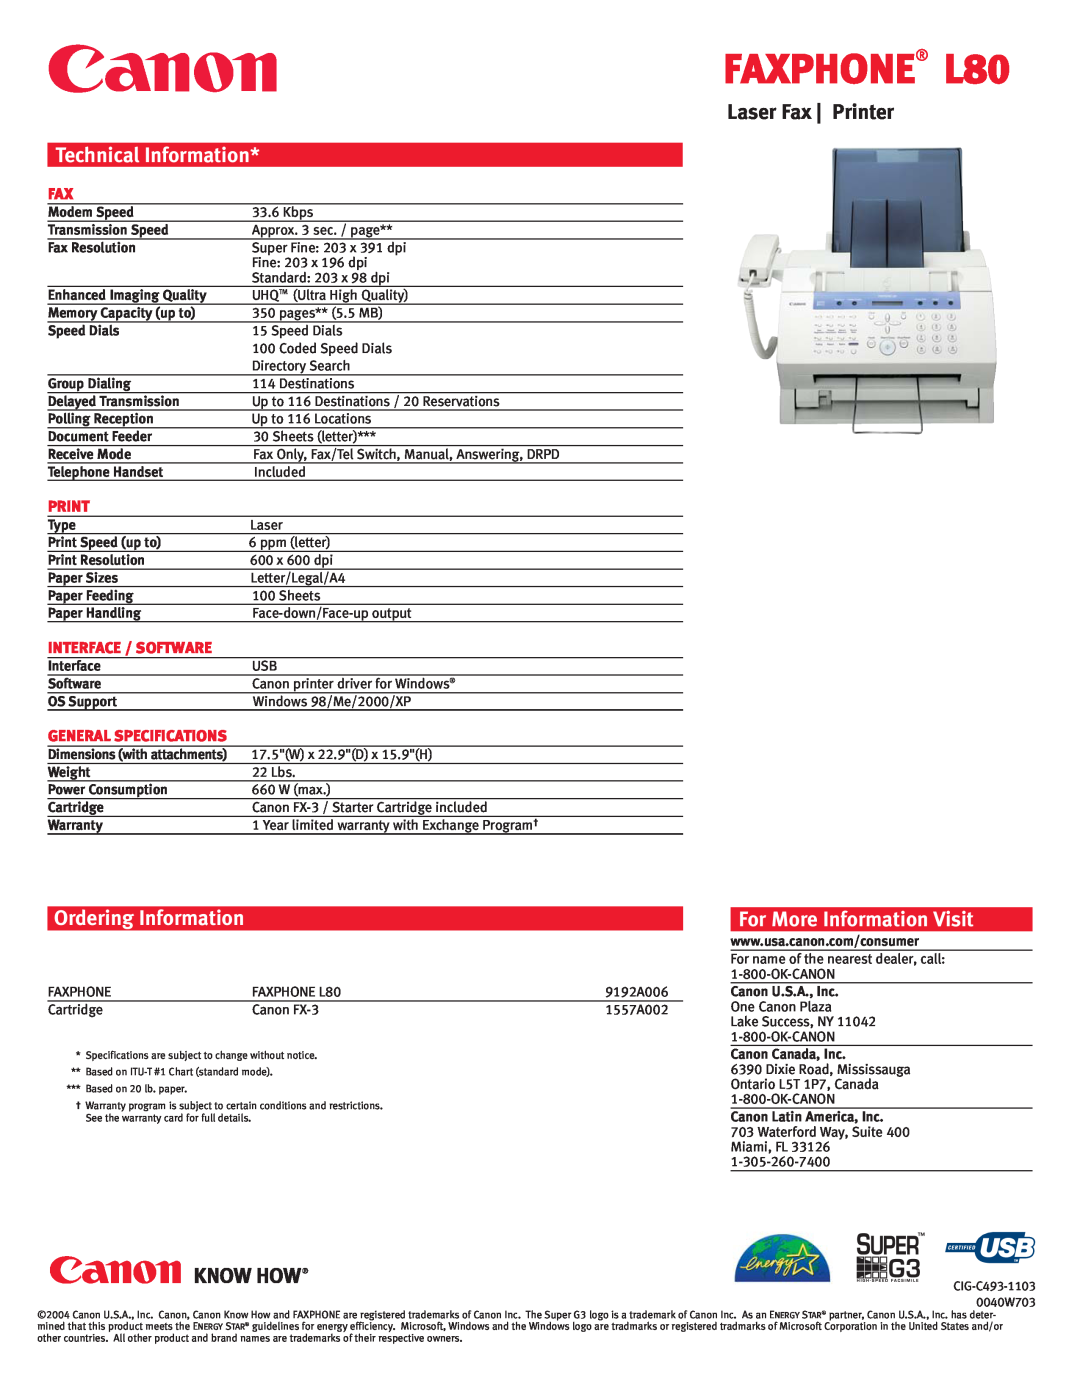 Canon manual Laser Fax Printer, FAXPHONE L80, Technical Information, For More Information Visit, Ordering Information 